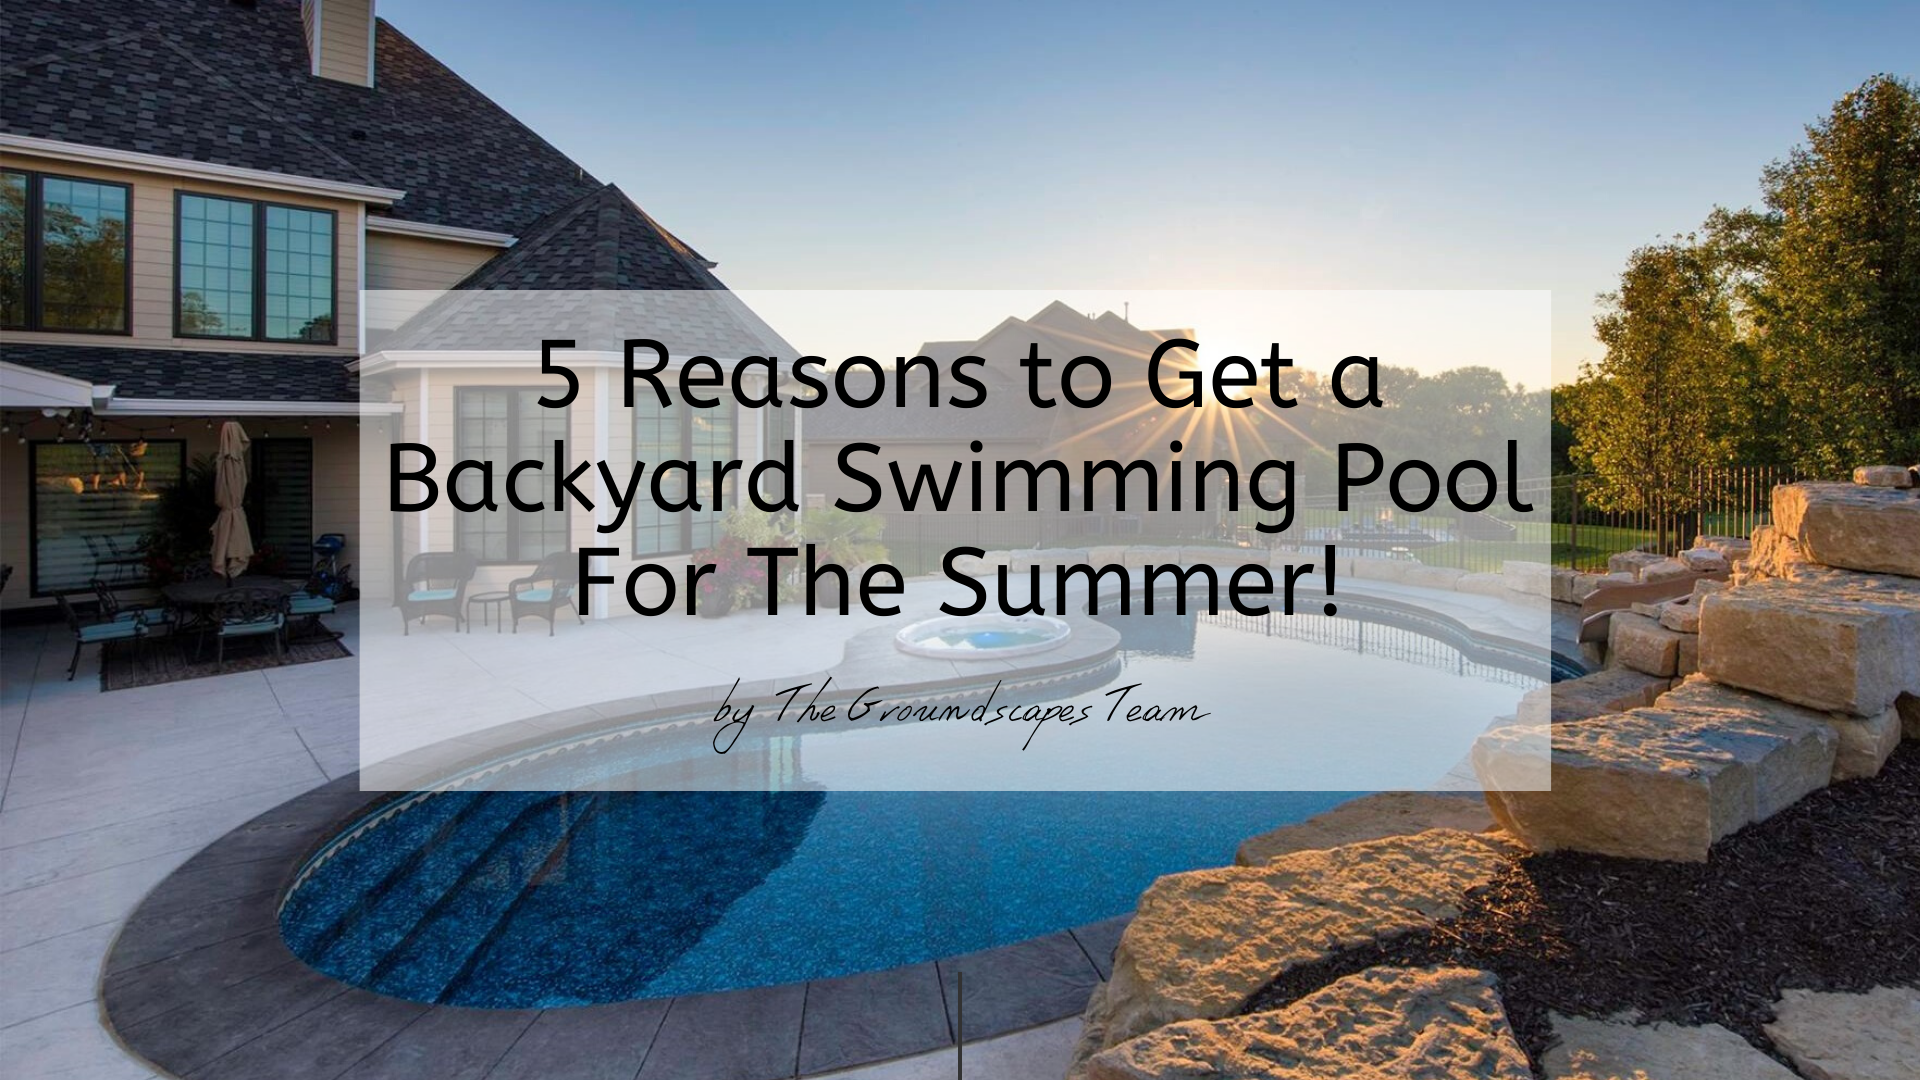 5 Reasons to Get a Backyard Swimming Pool For The Summer!